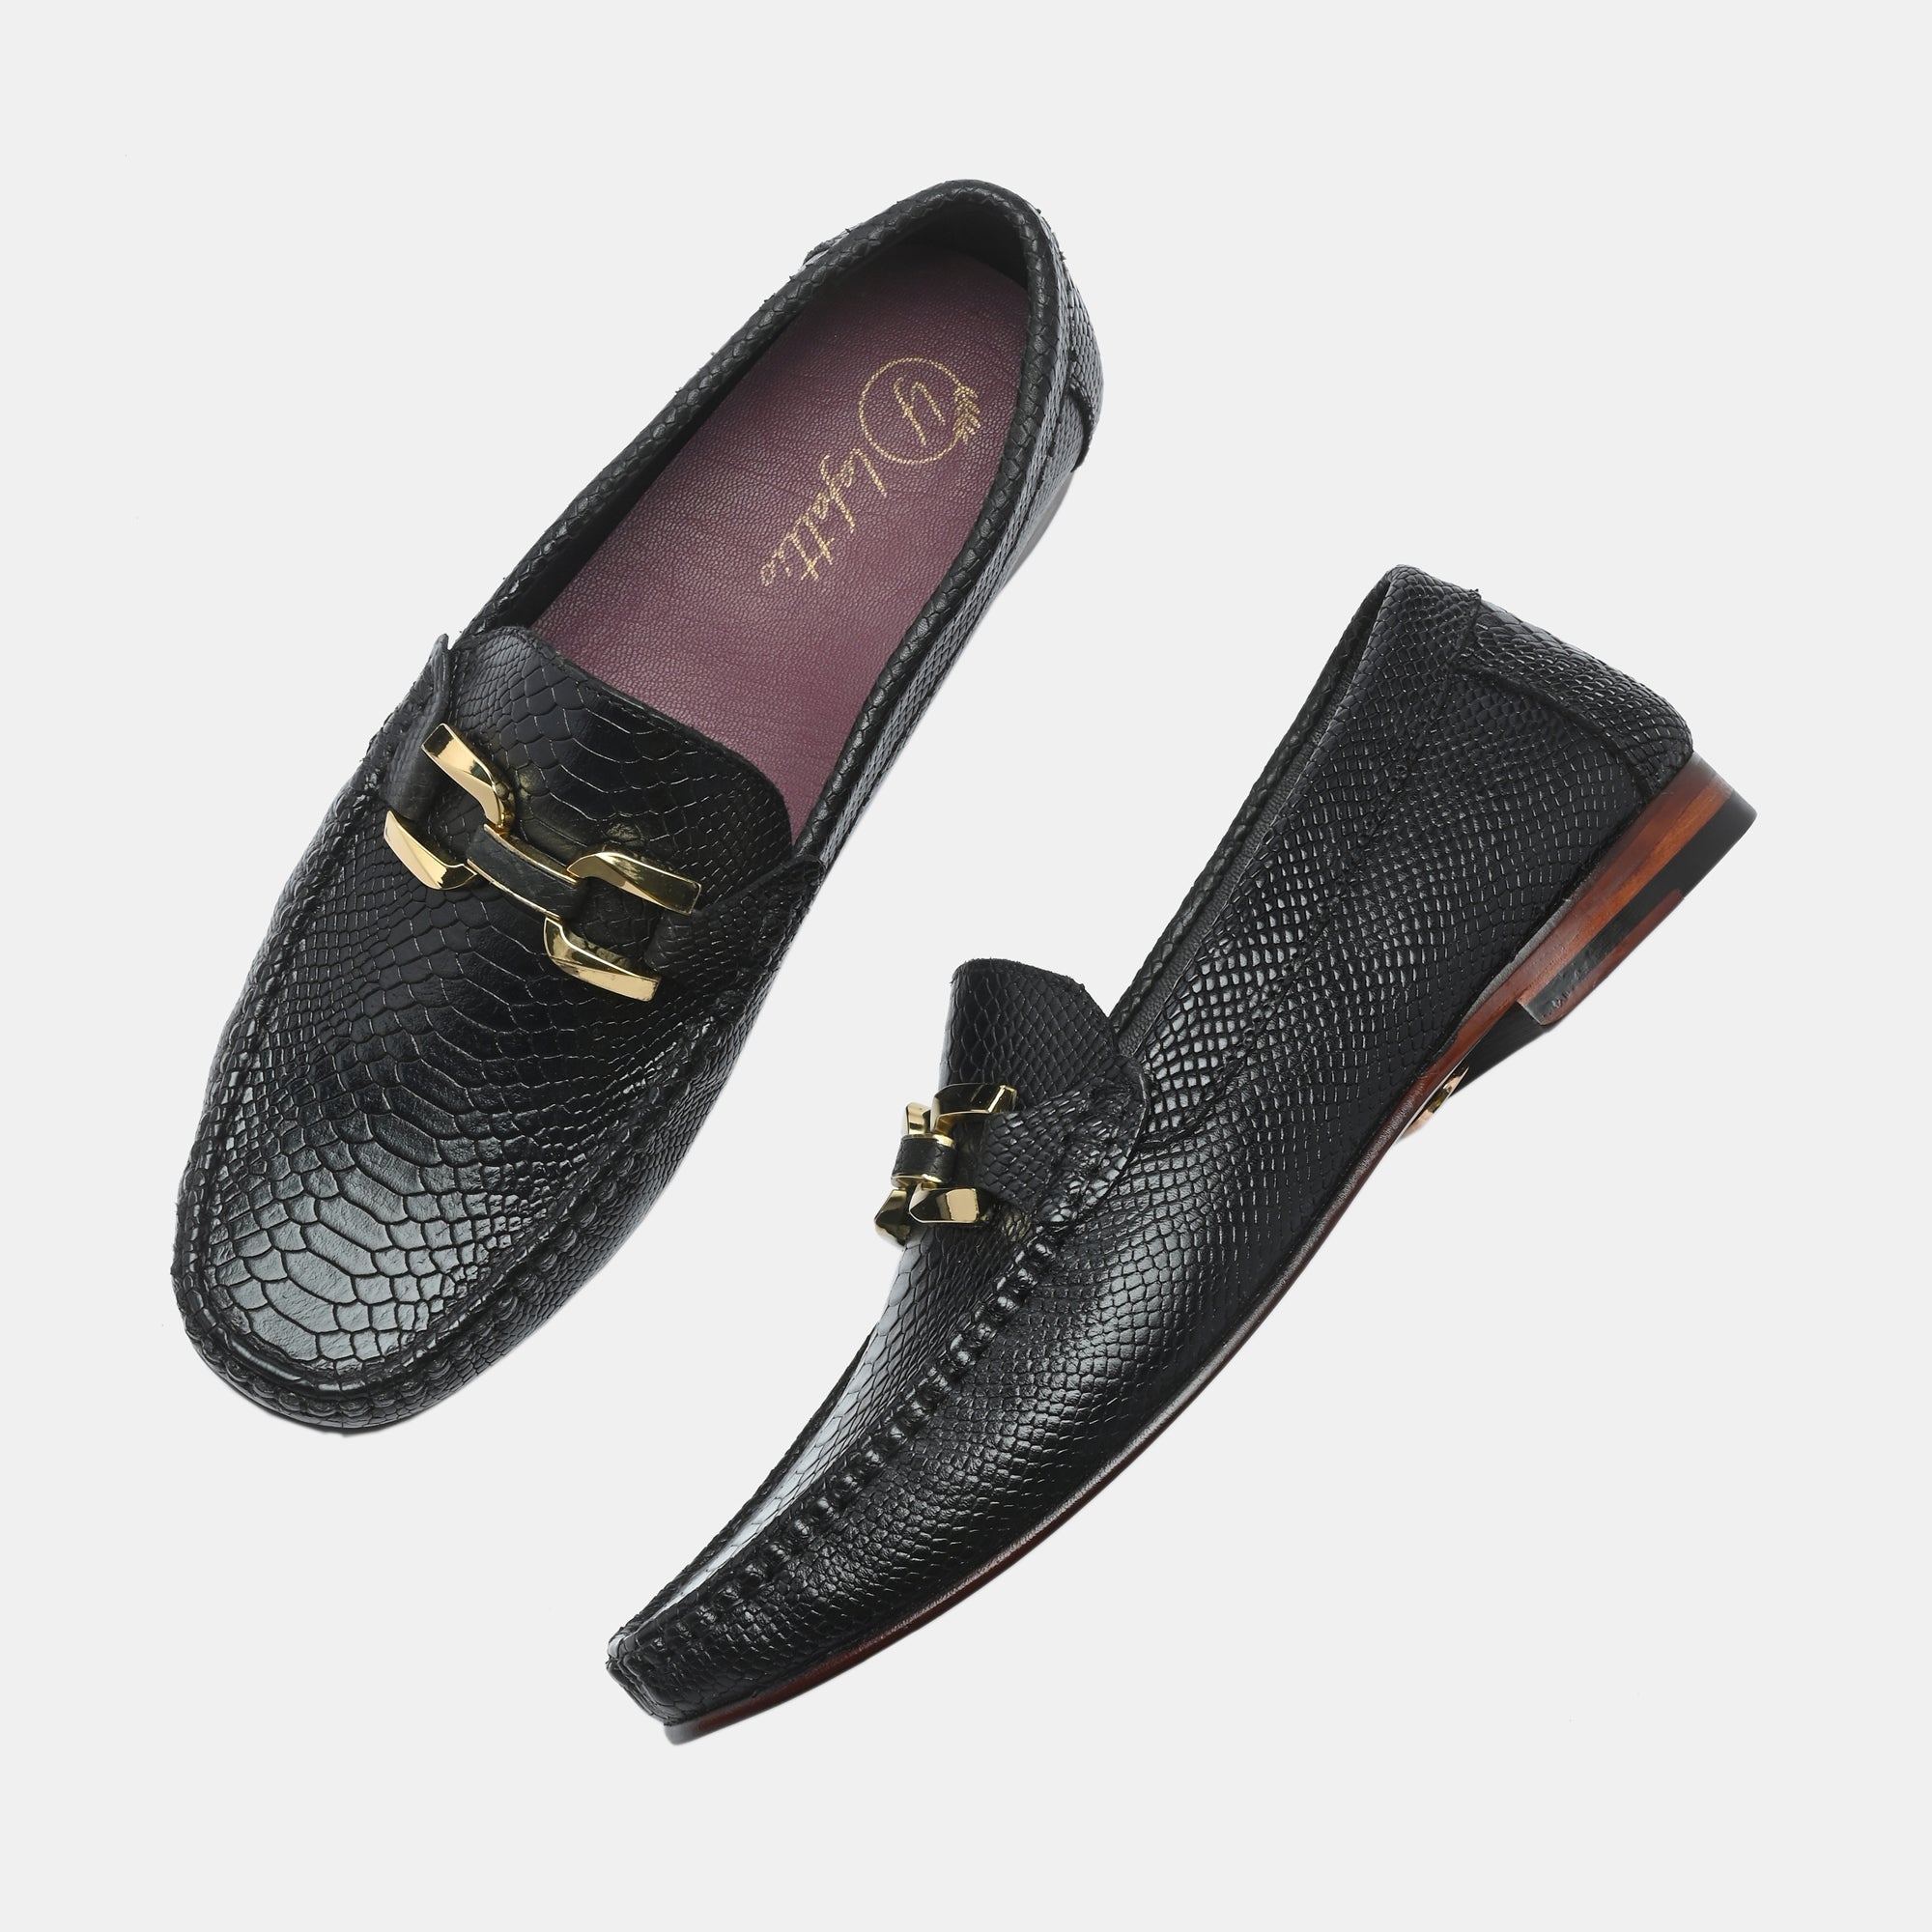 Black Imprinted Buckled Loafers by Lafattio